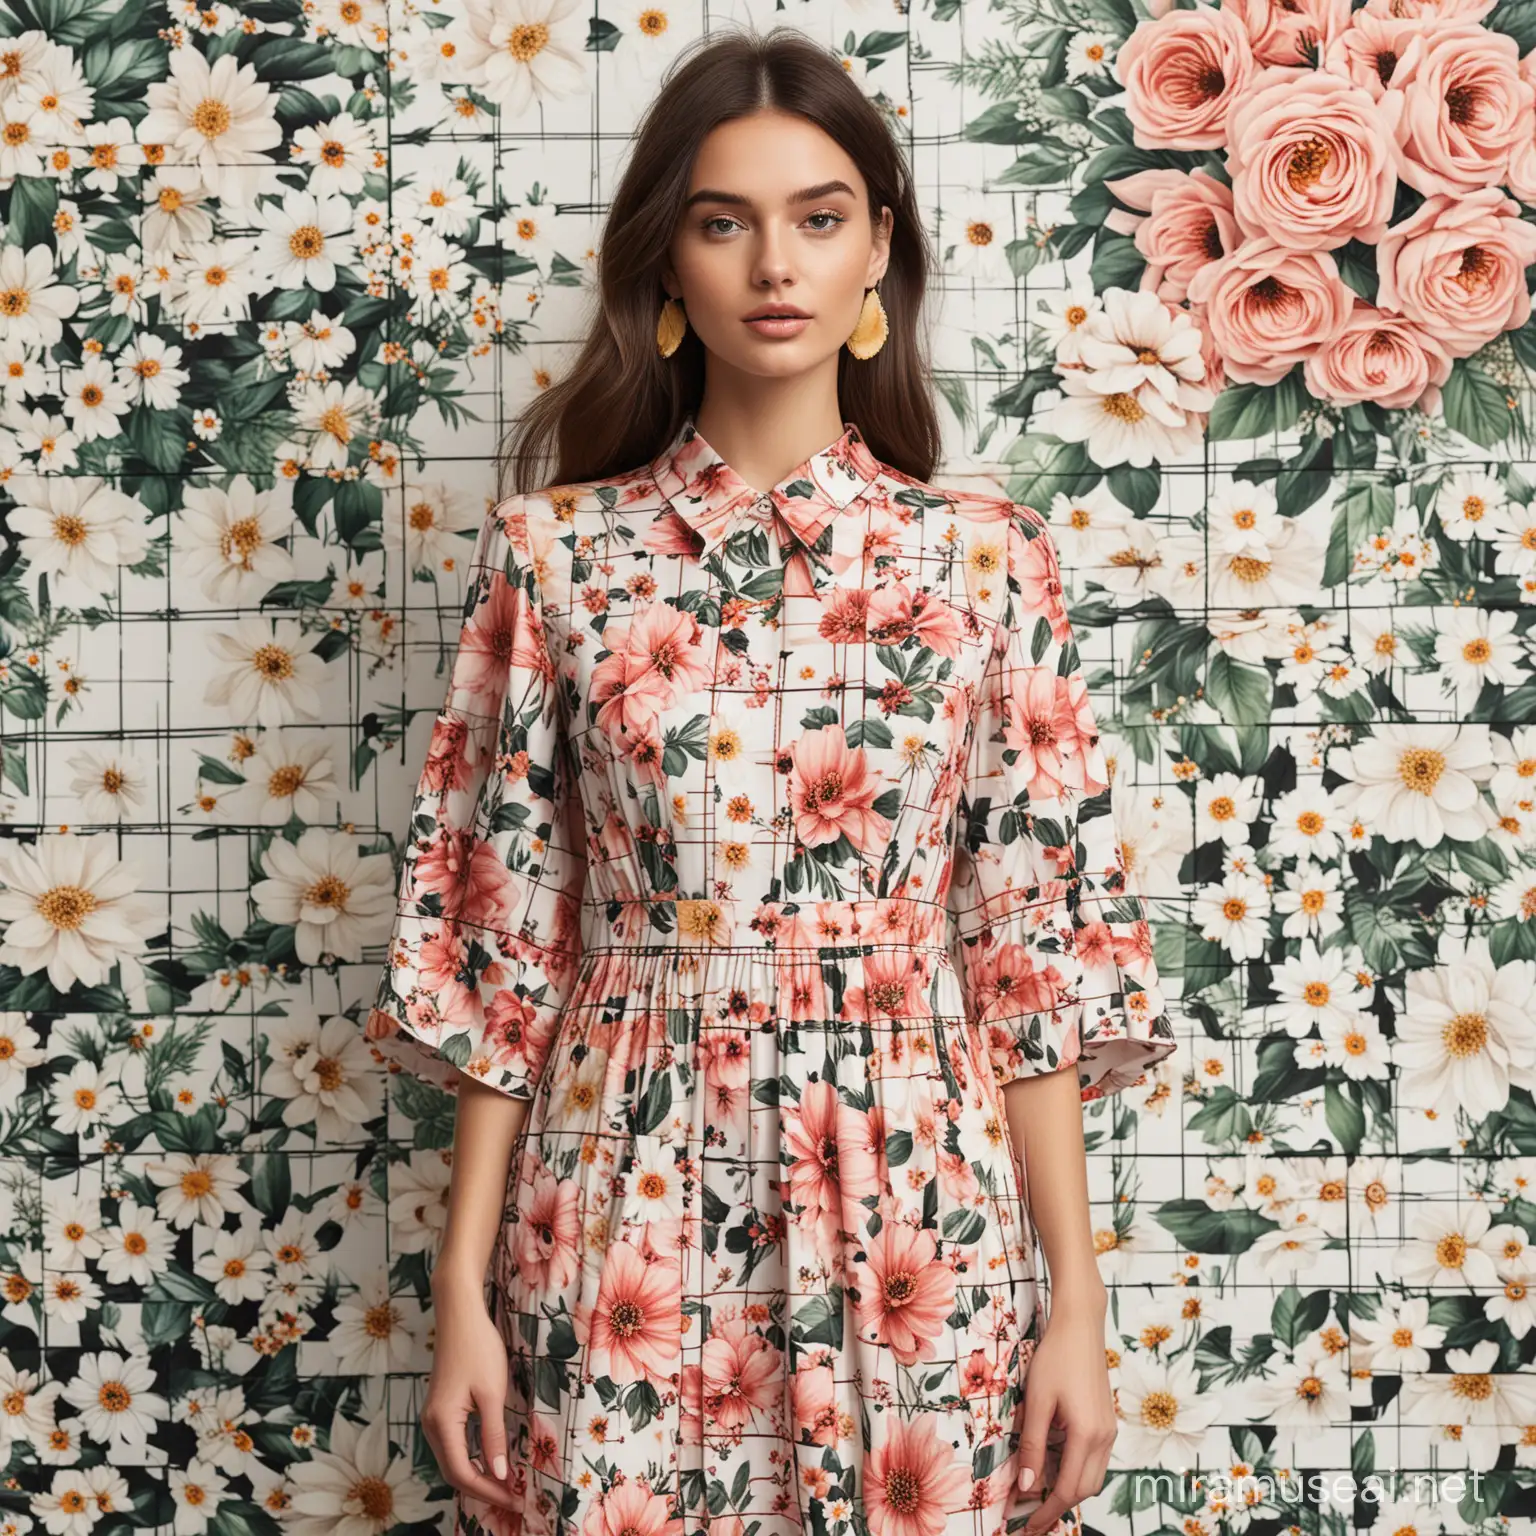 create a grid for instagram by fashion brand which on floral prints dress